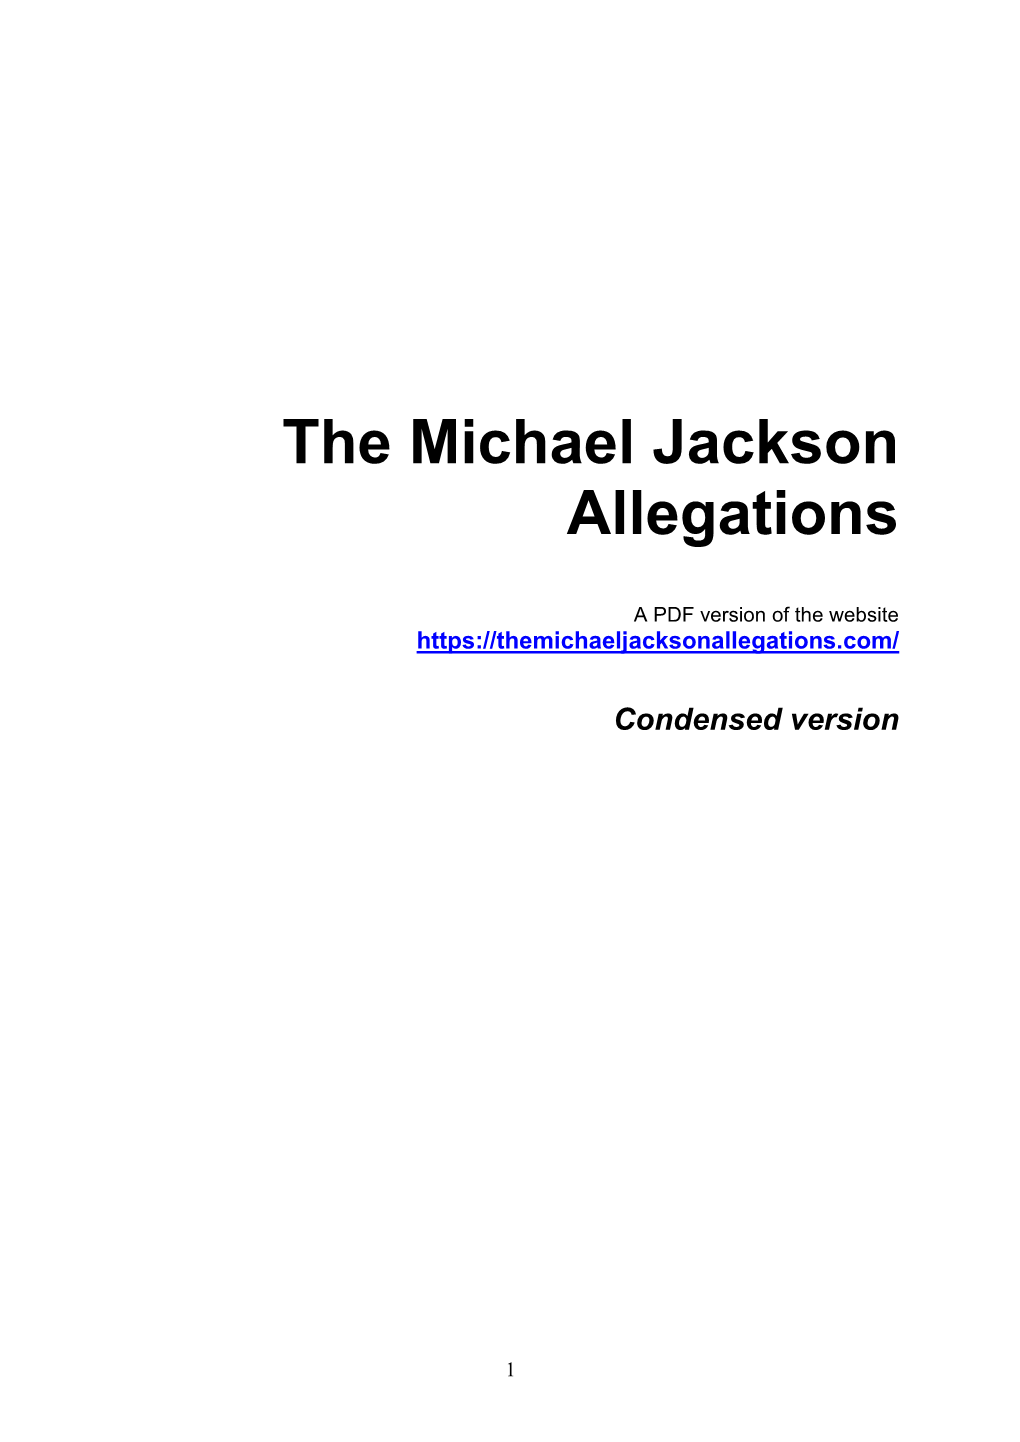 The Michael Jackson Allegations